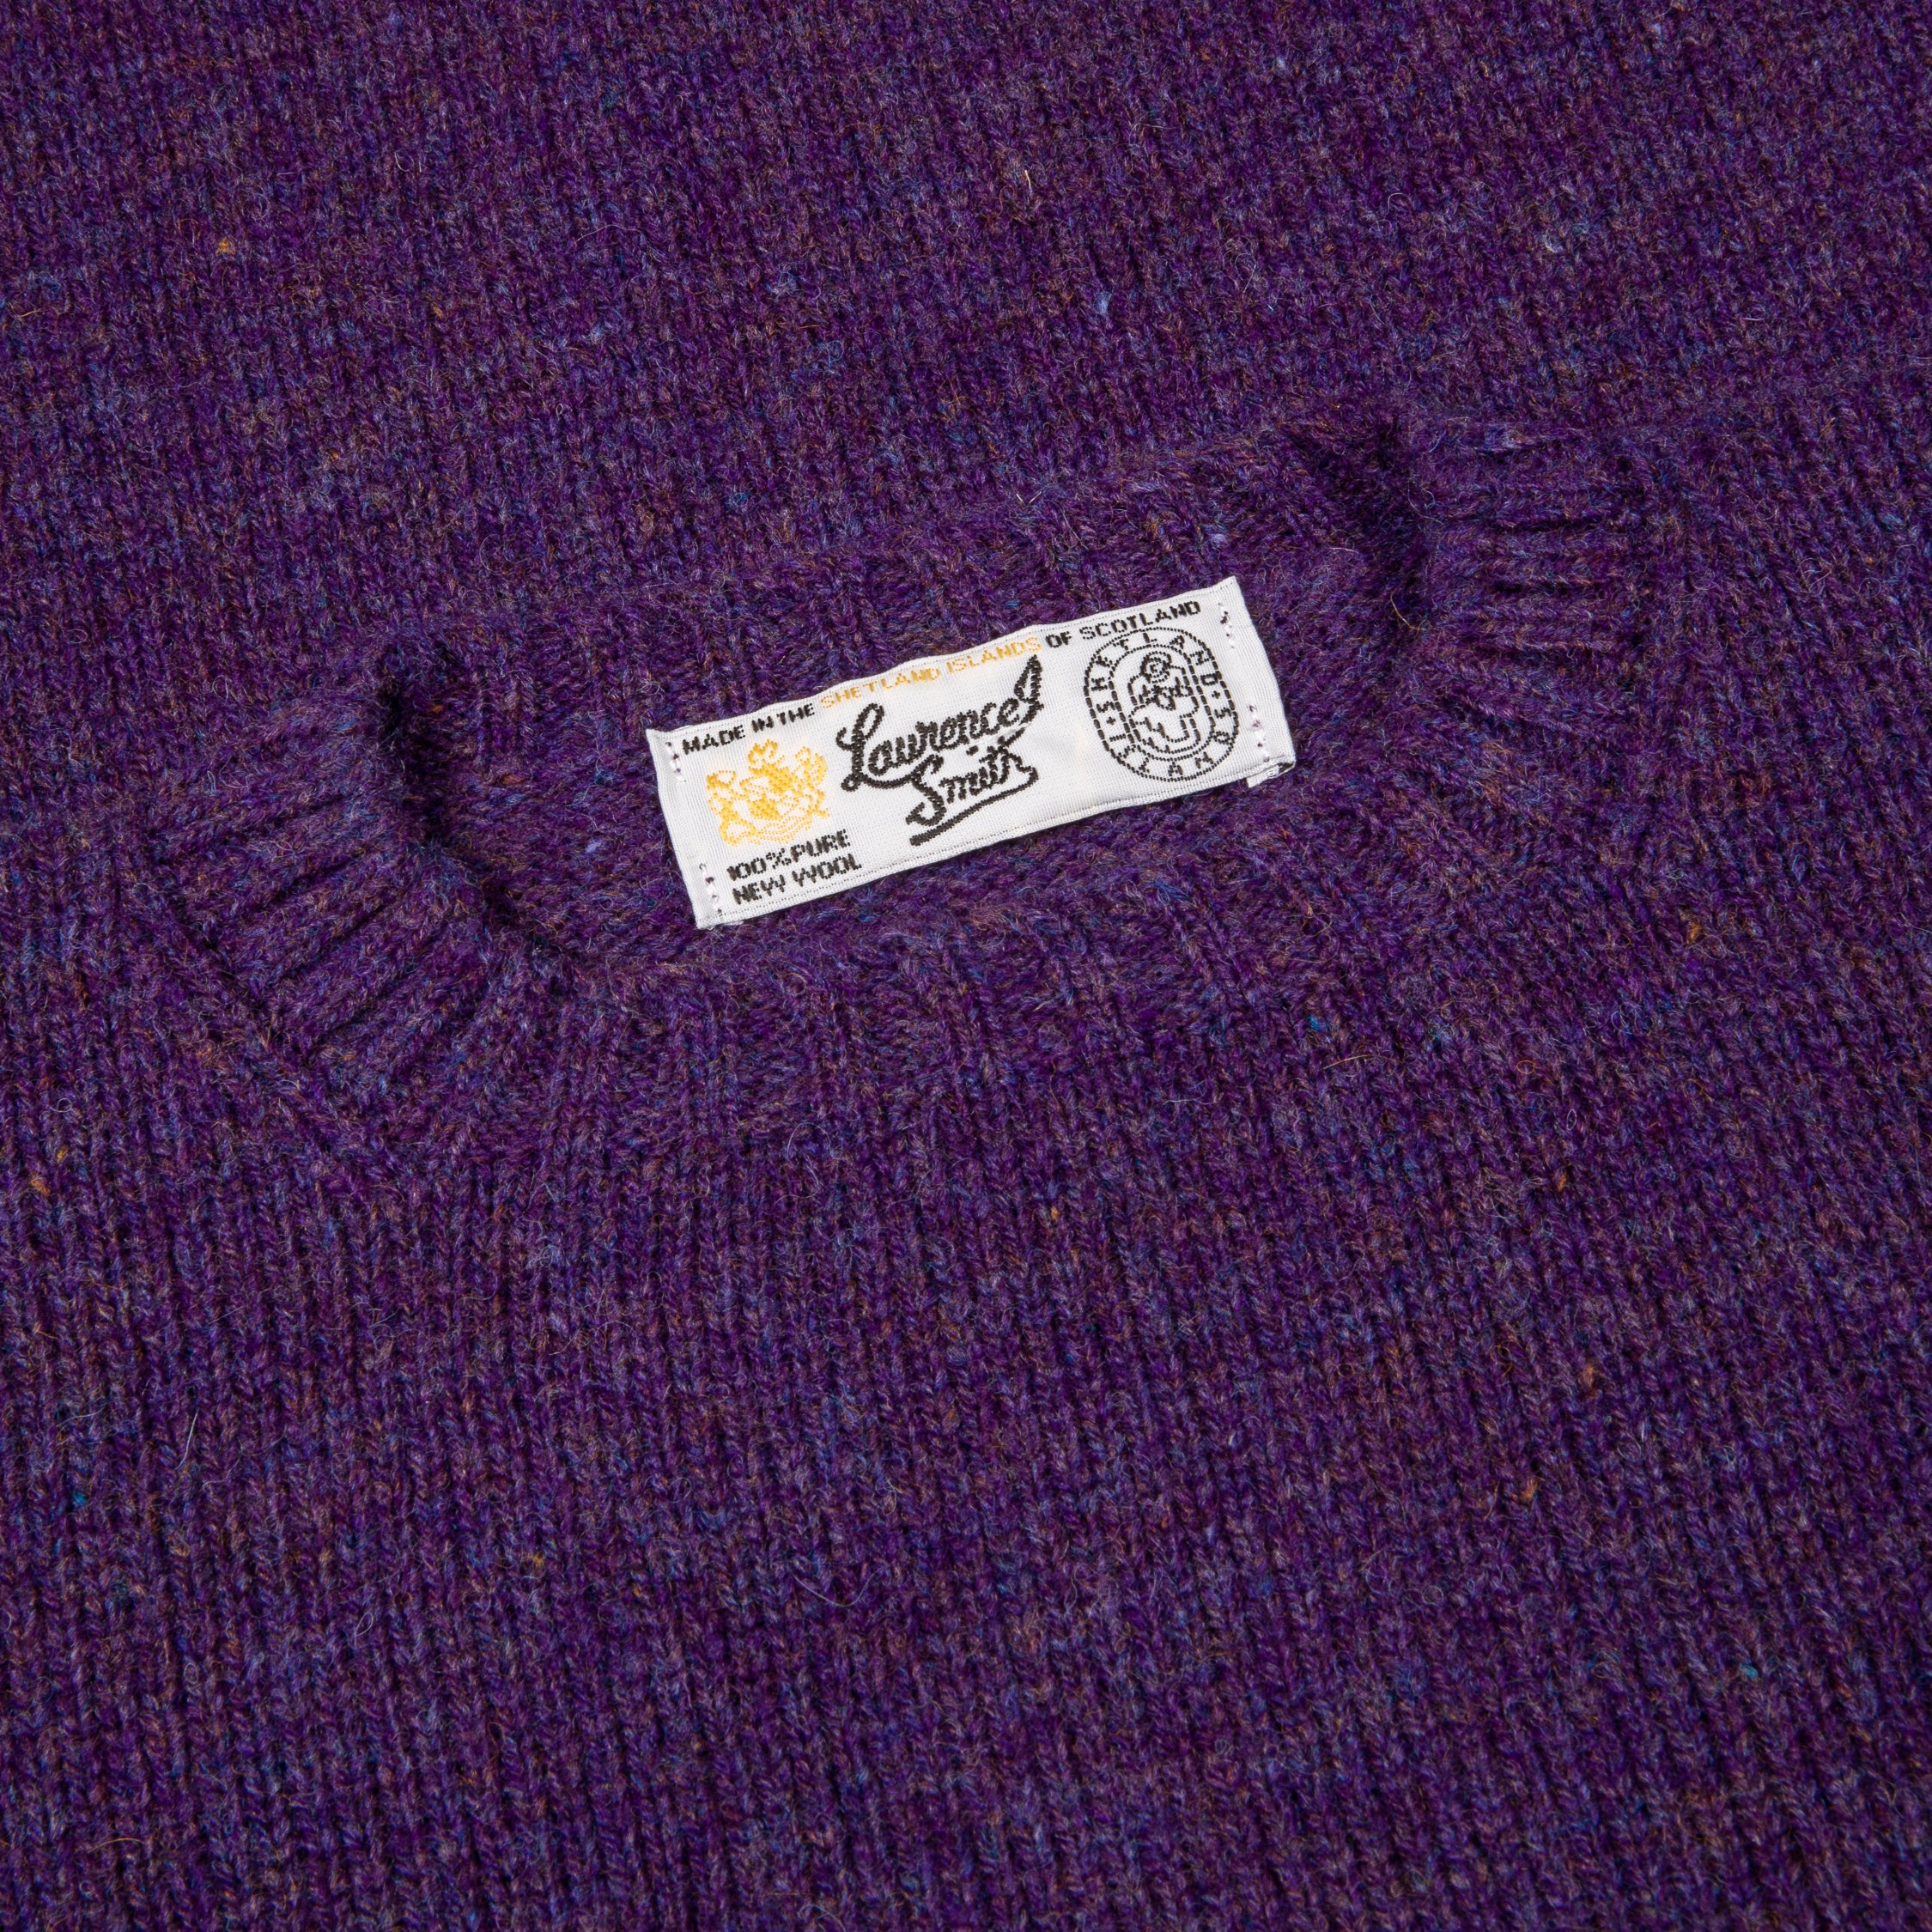 Laurence J. Smith  Super soft Seamless Crew Neck Pullover royal Violet